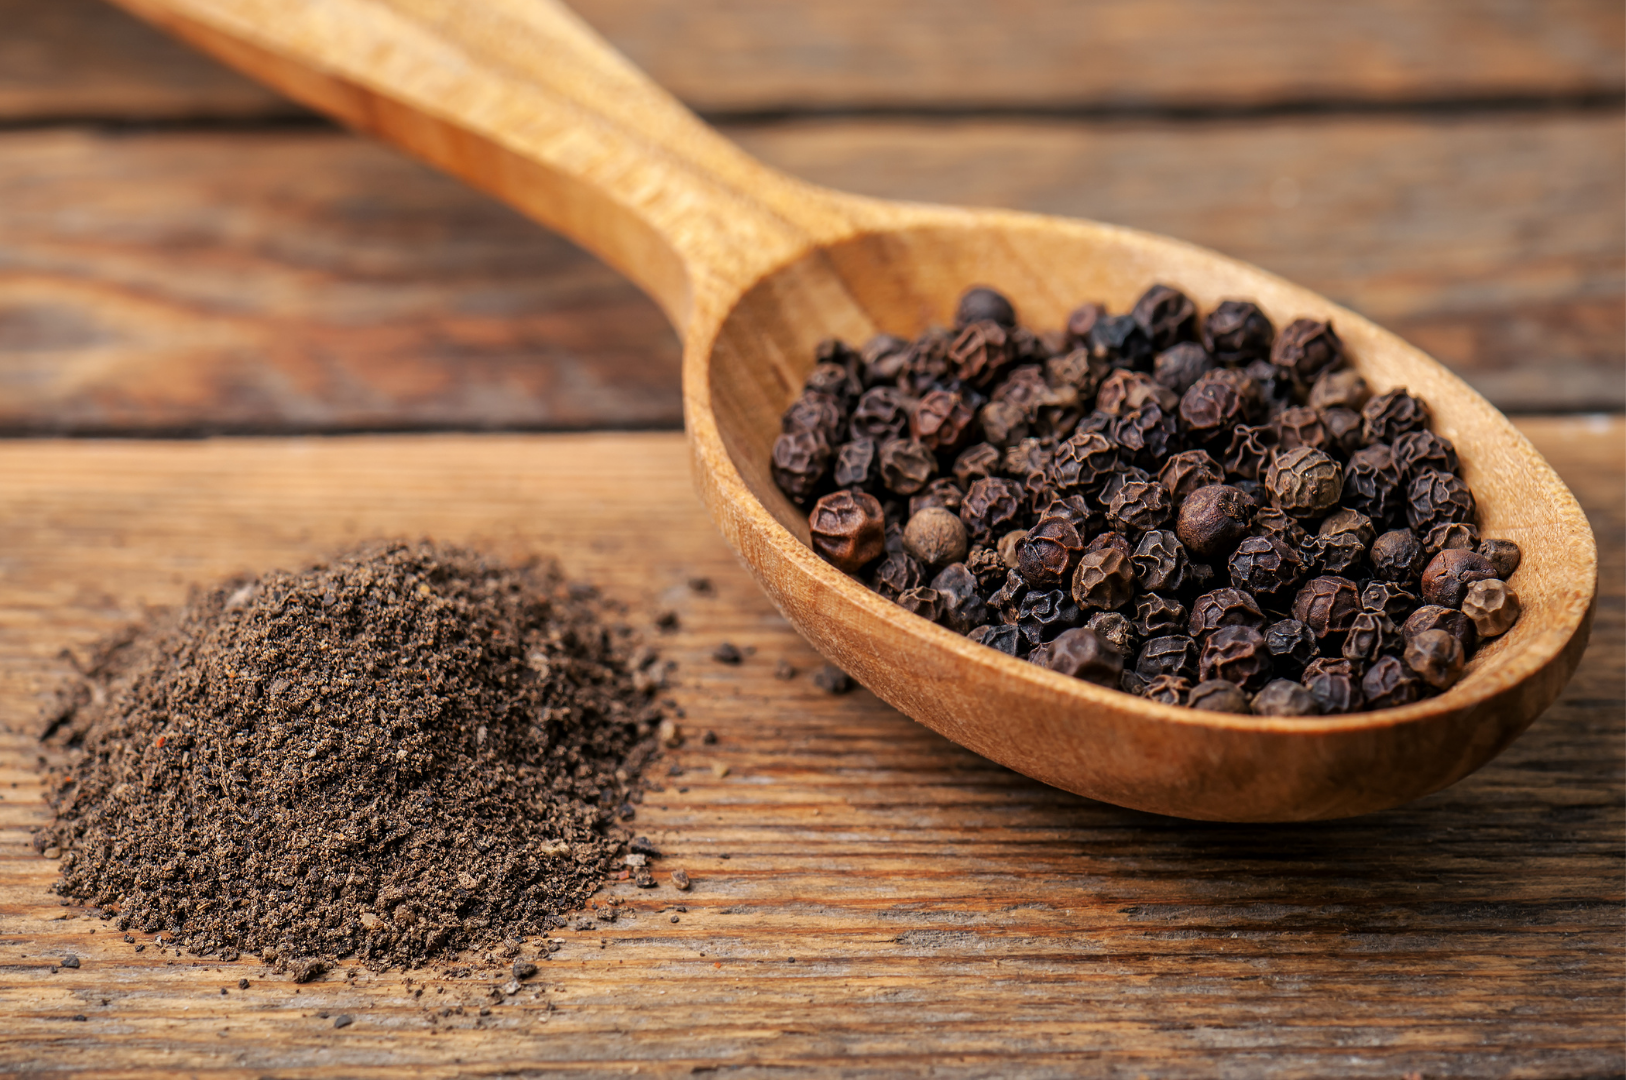 Black pepper or black pepper extract can be a great way to help grow hair or improve hair health.